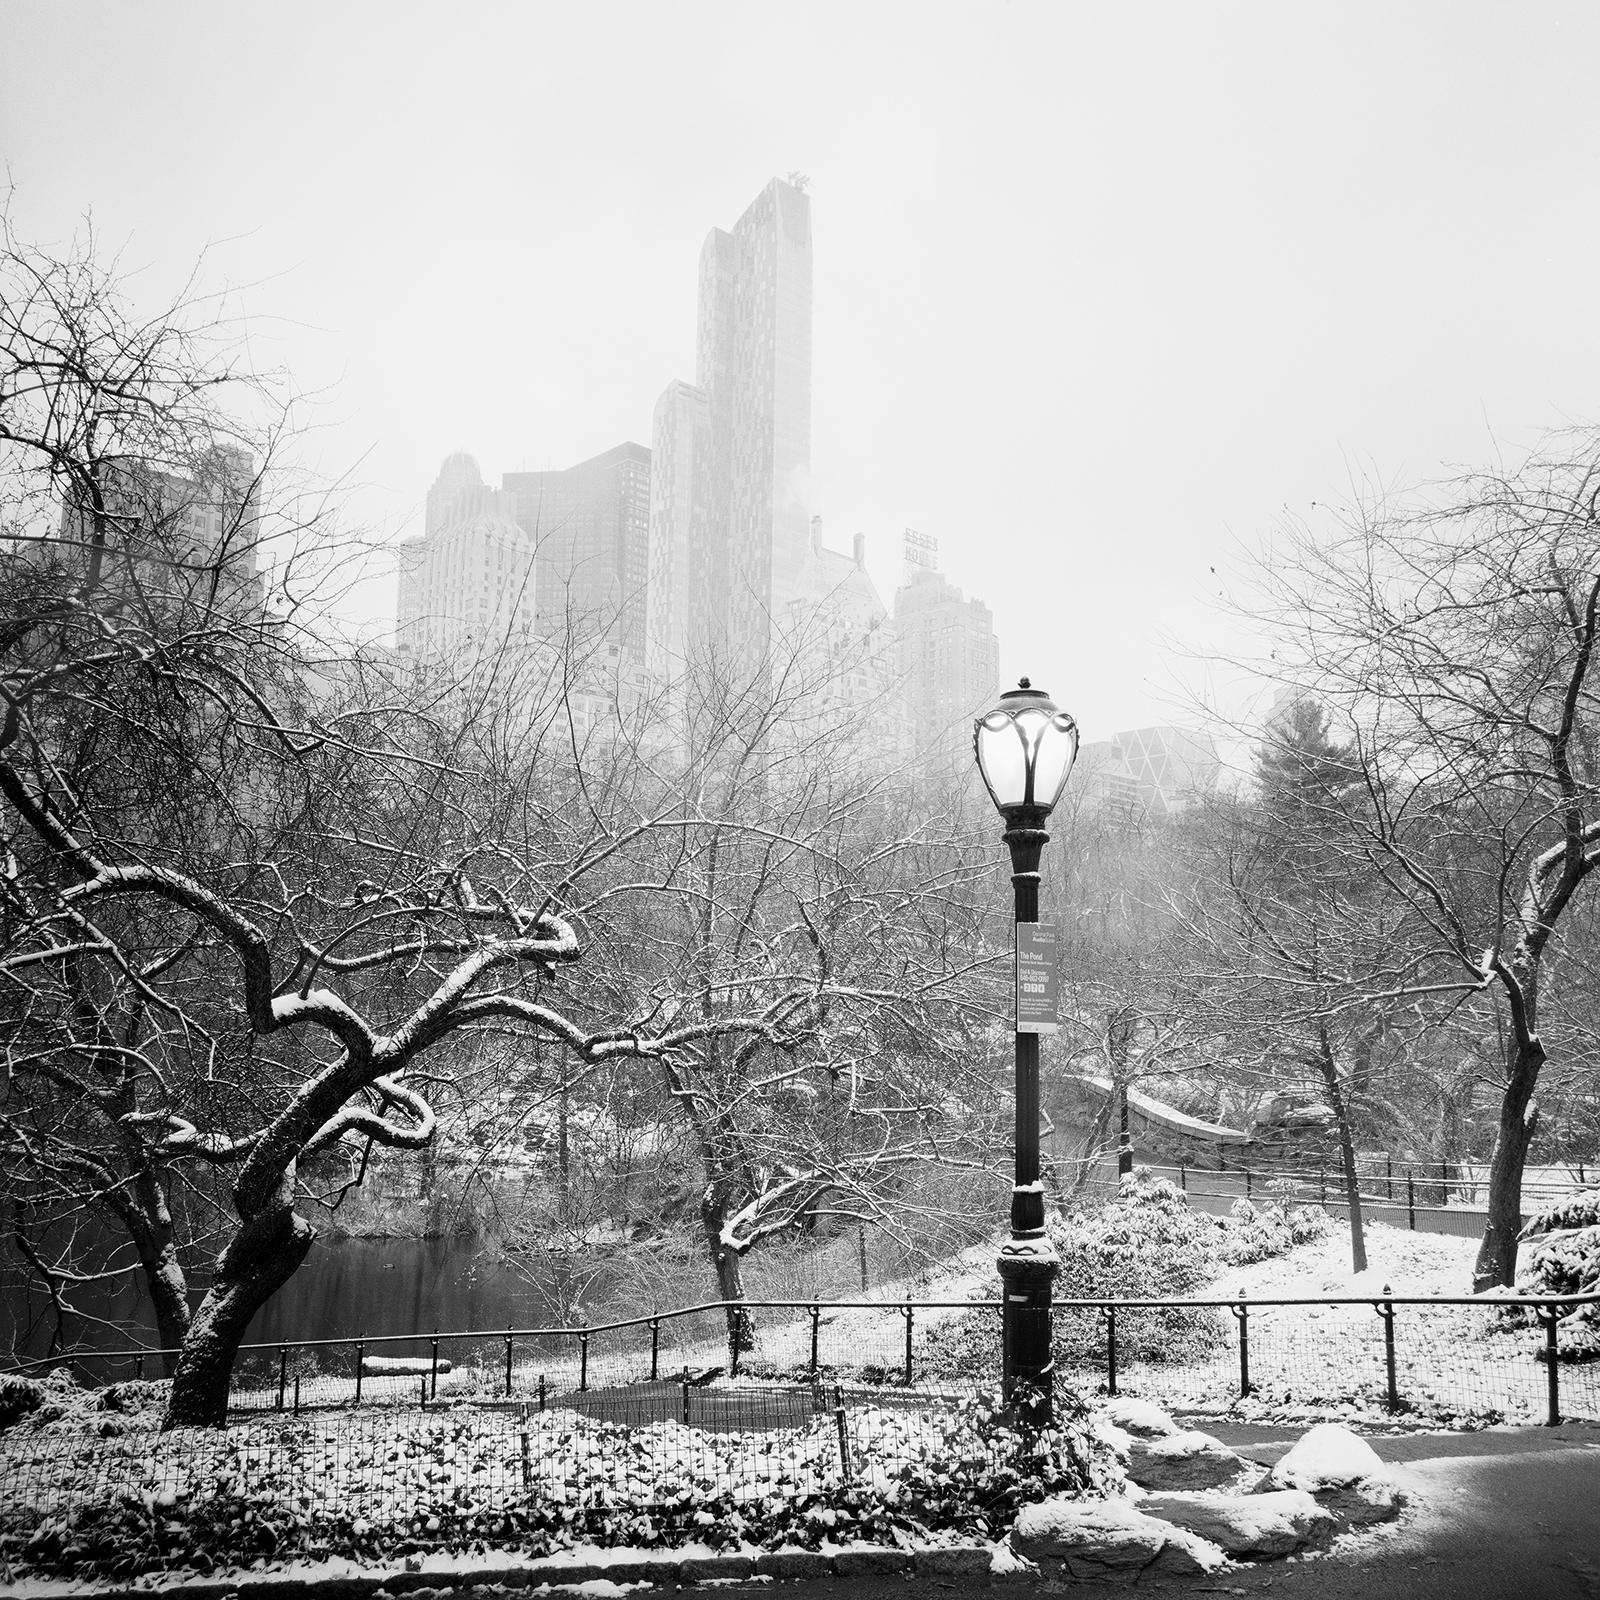 Gerald Berghammer Black and White Photograph - Snow covered Central Park, New York City, black and white cityscape photography